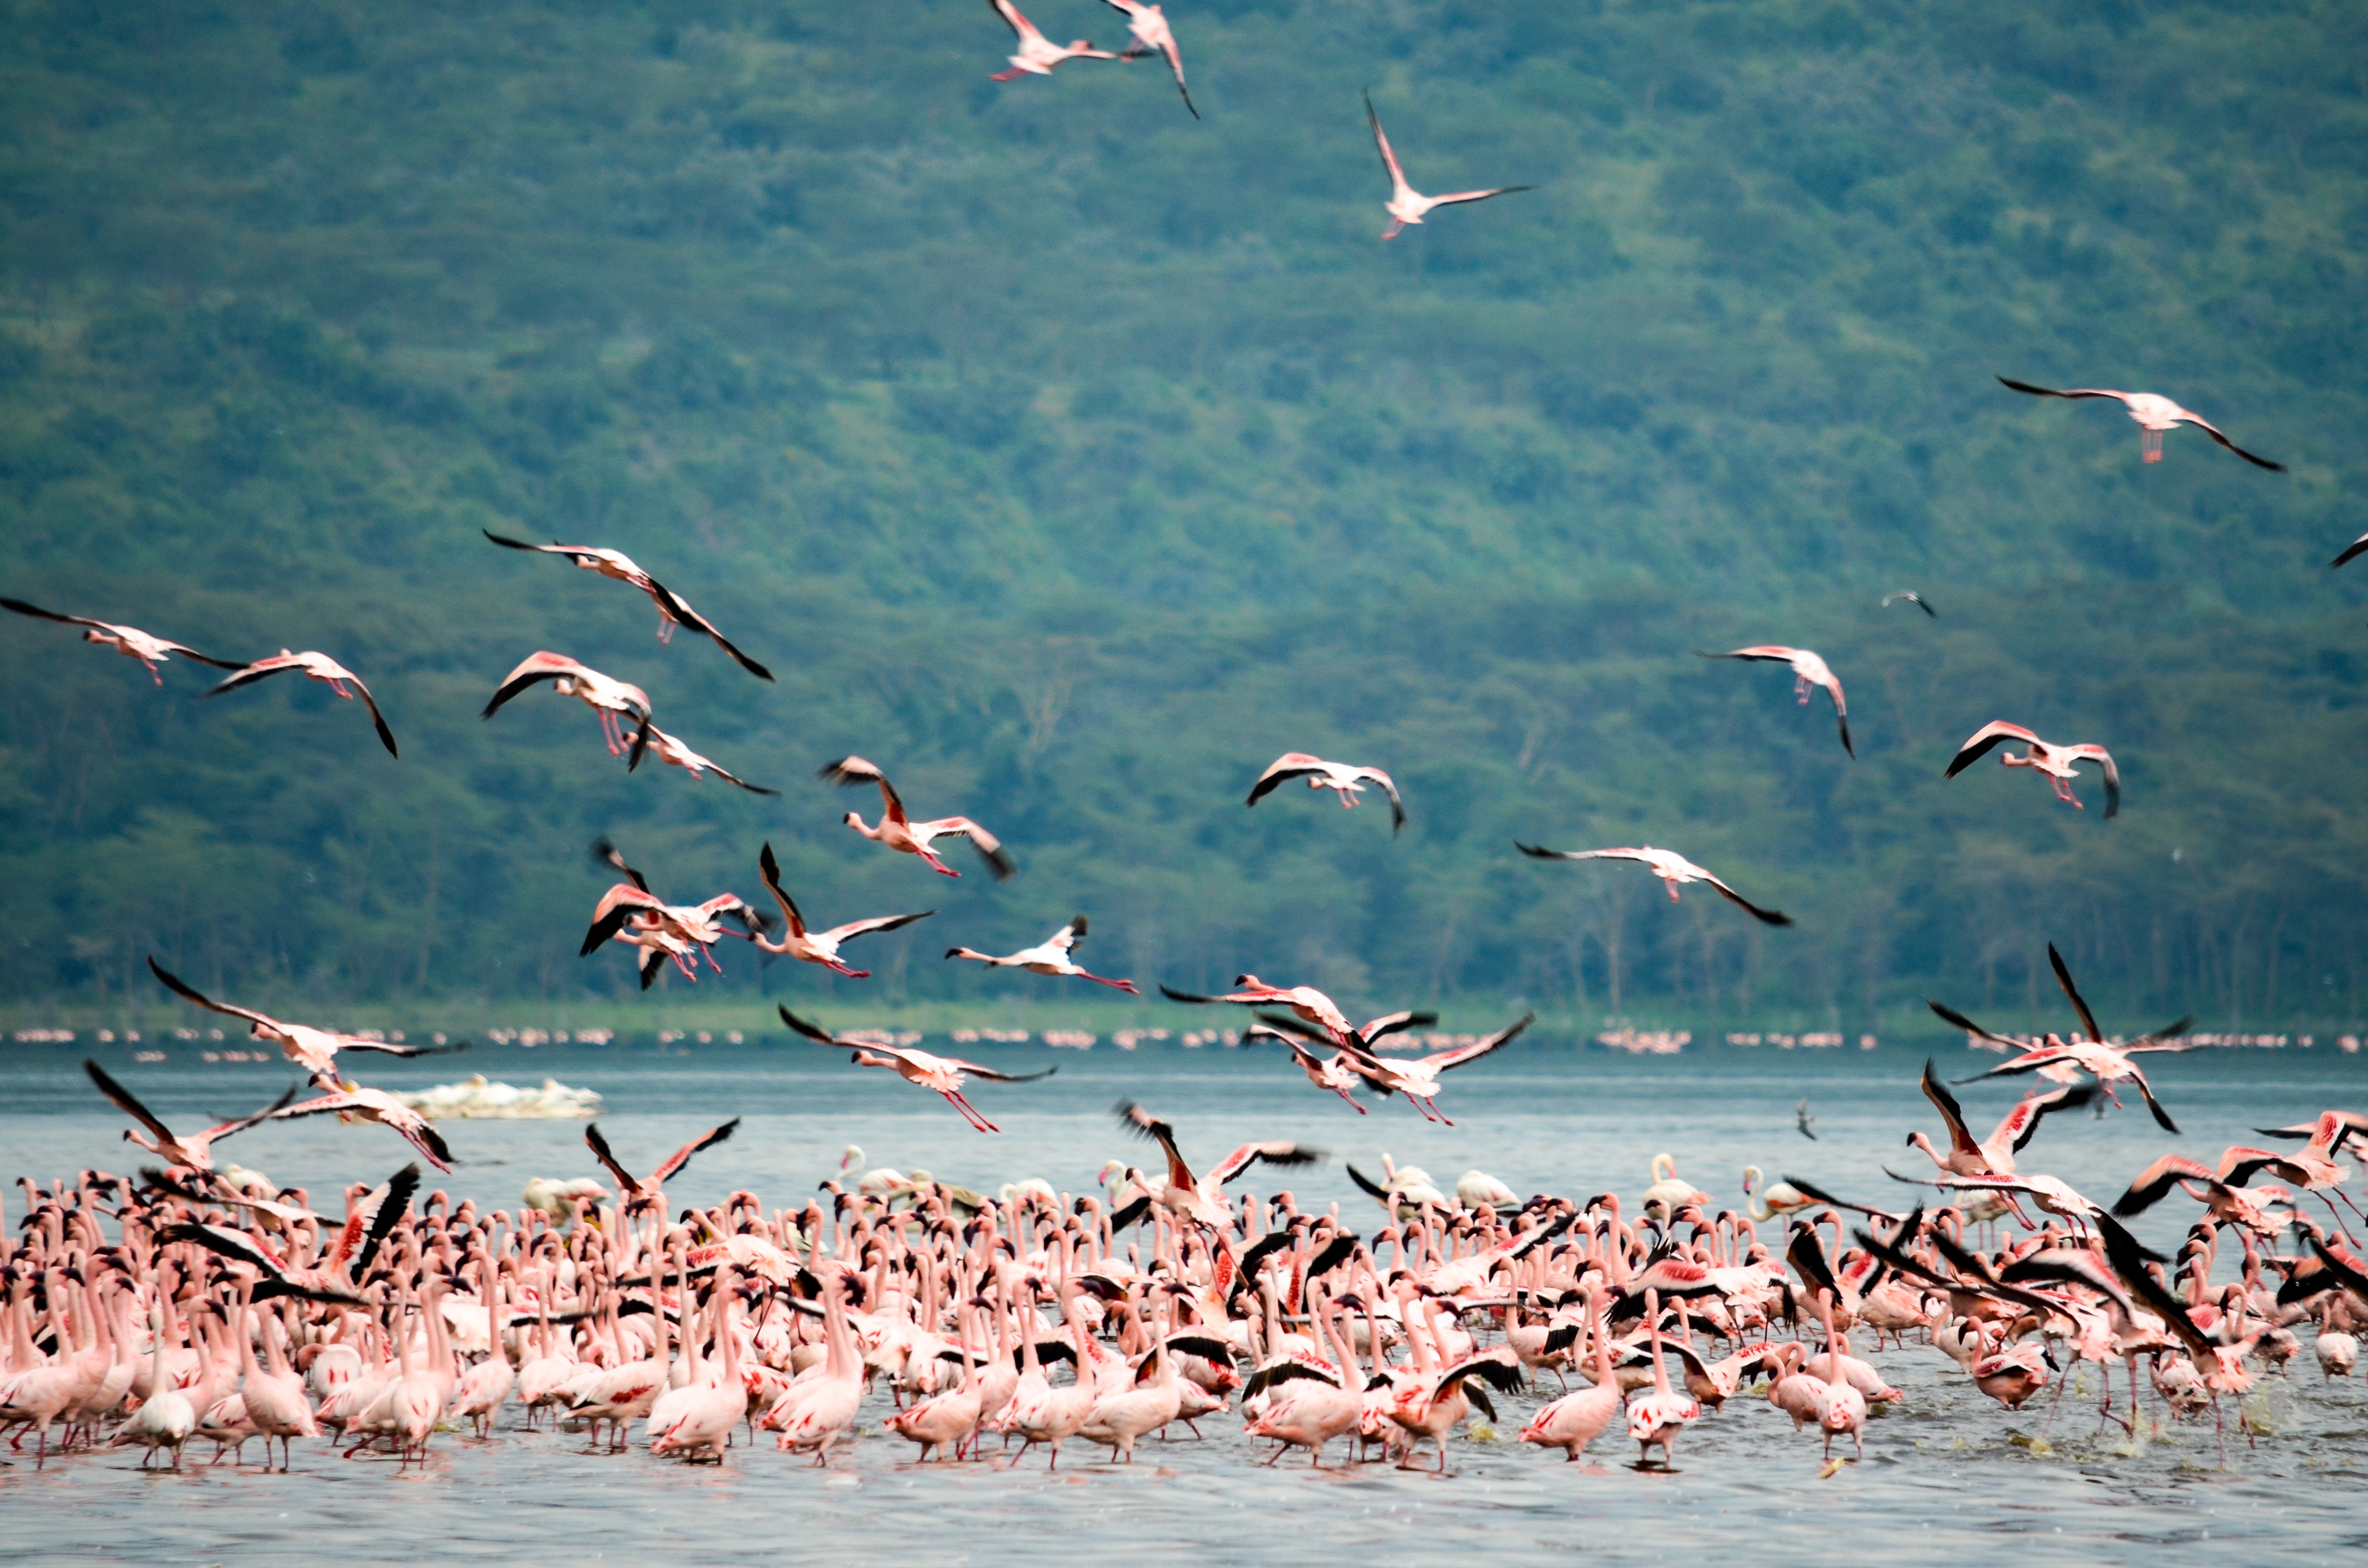 Flock of flamingo standing on body of water over viewing trees photo